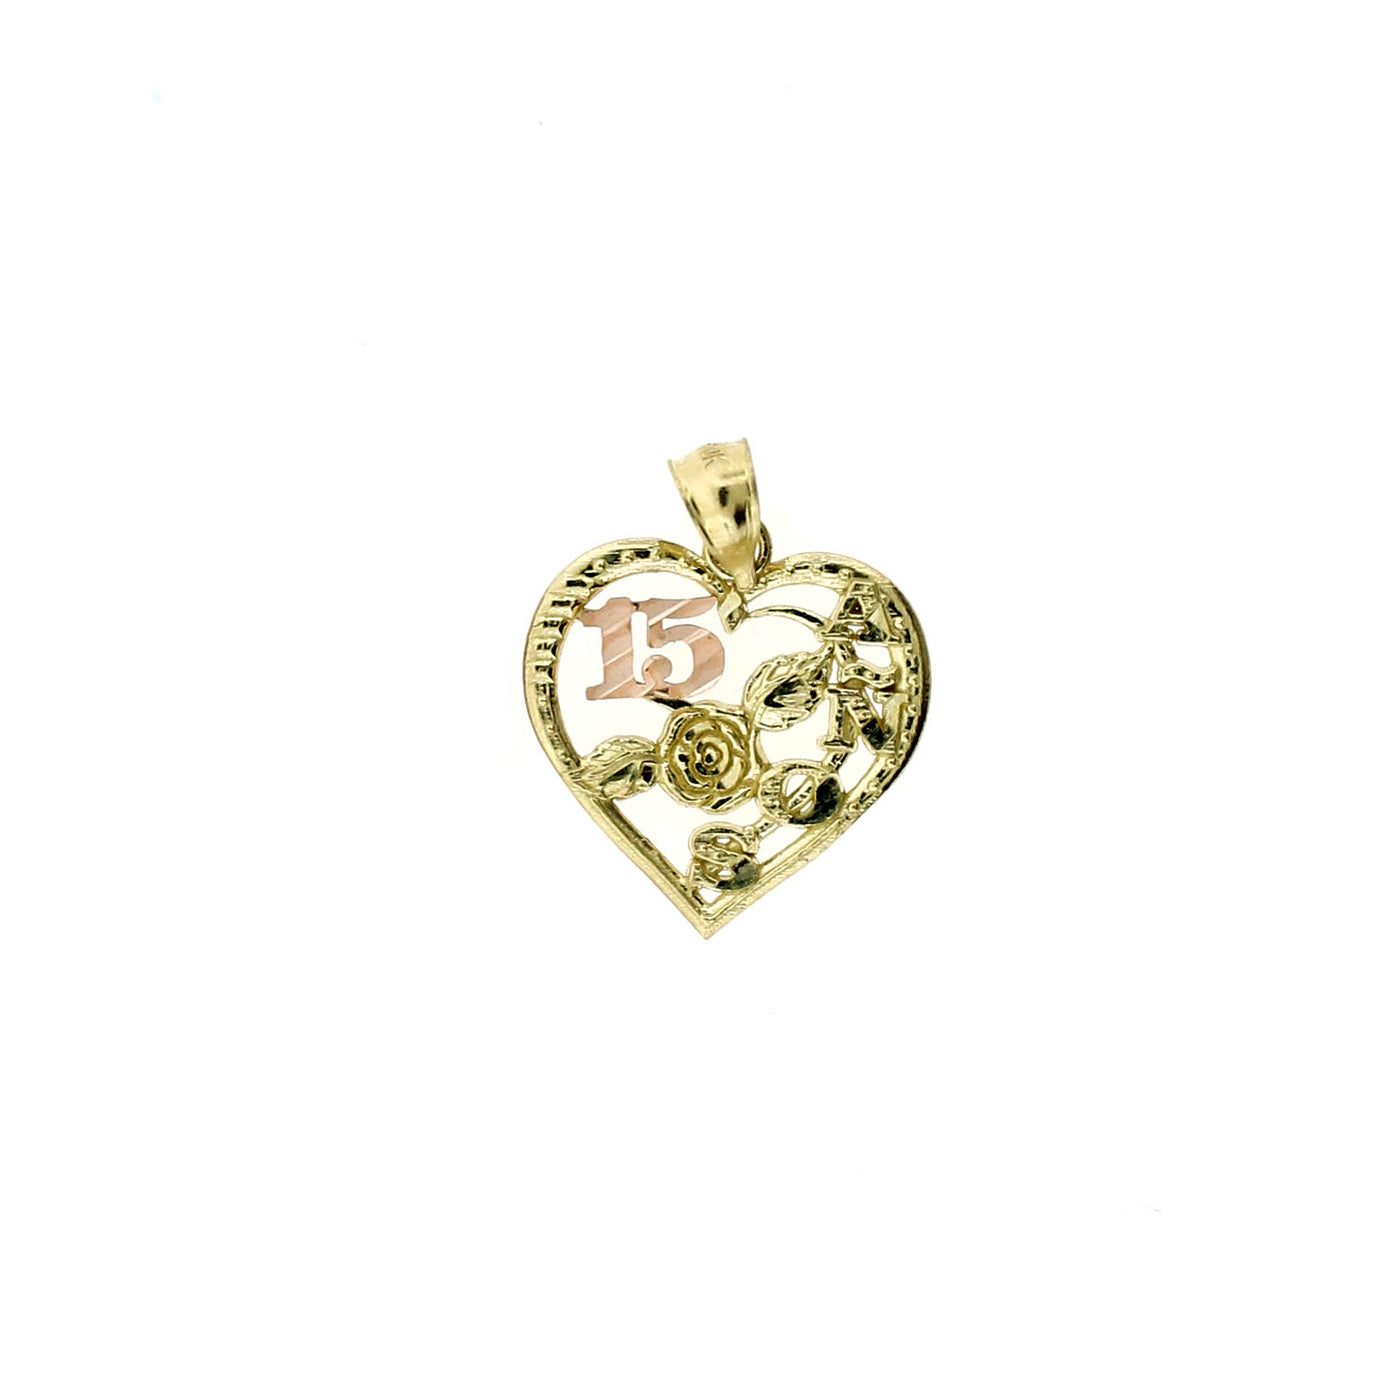 Real 10K Yellow Gold Diamond Cut Sweet 15 Heart Pendant & 2.5mm Rope Chain Necklace Set